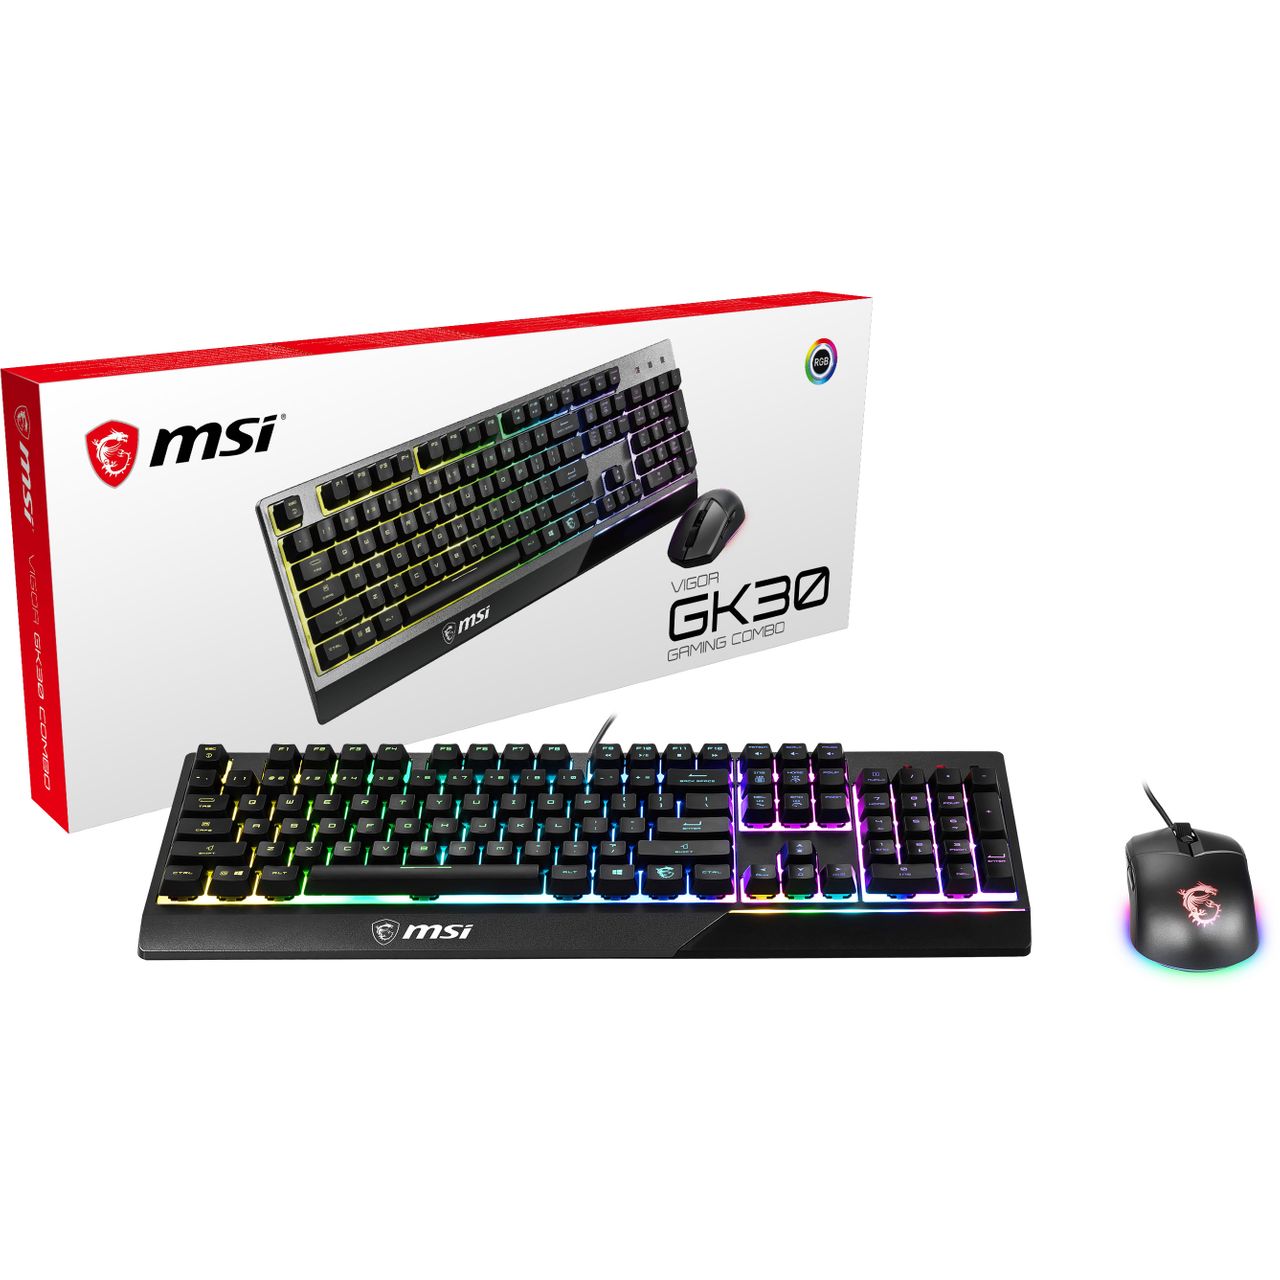 MSI Clutch GM11 Mouse and Vigor GK30 Wired USB Gaming Keyboard Review